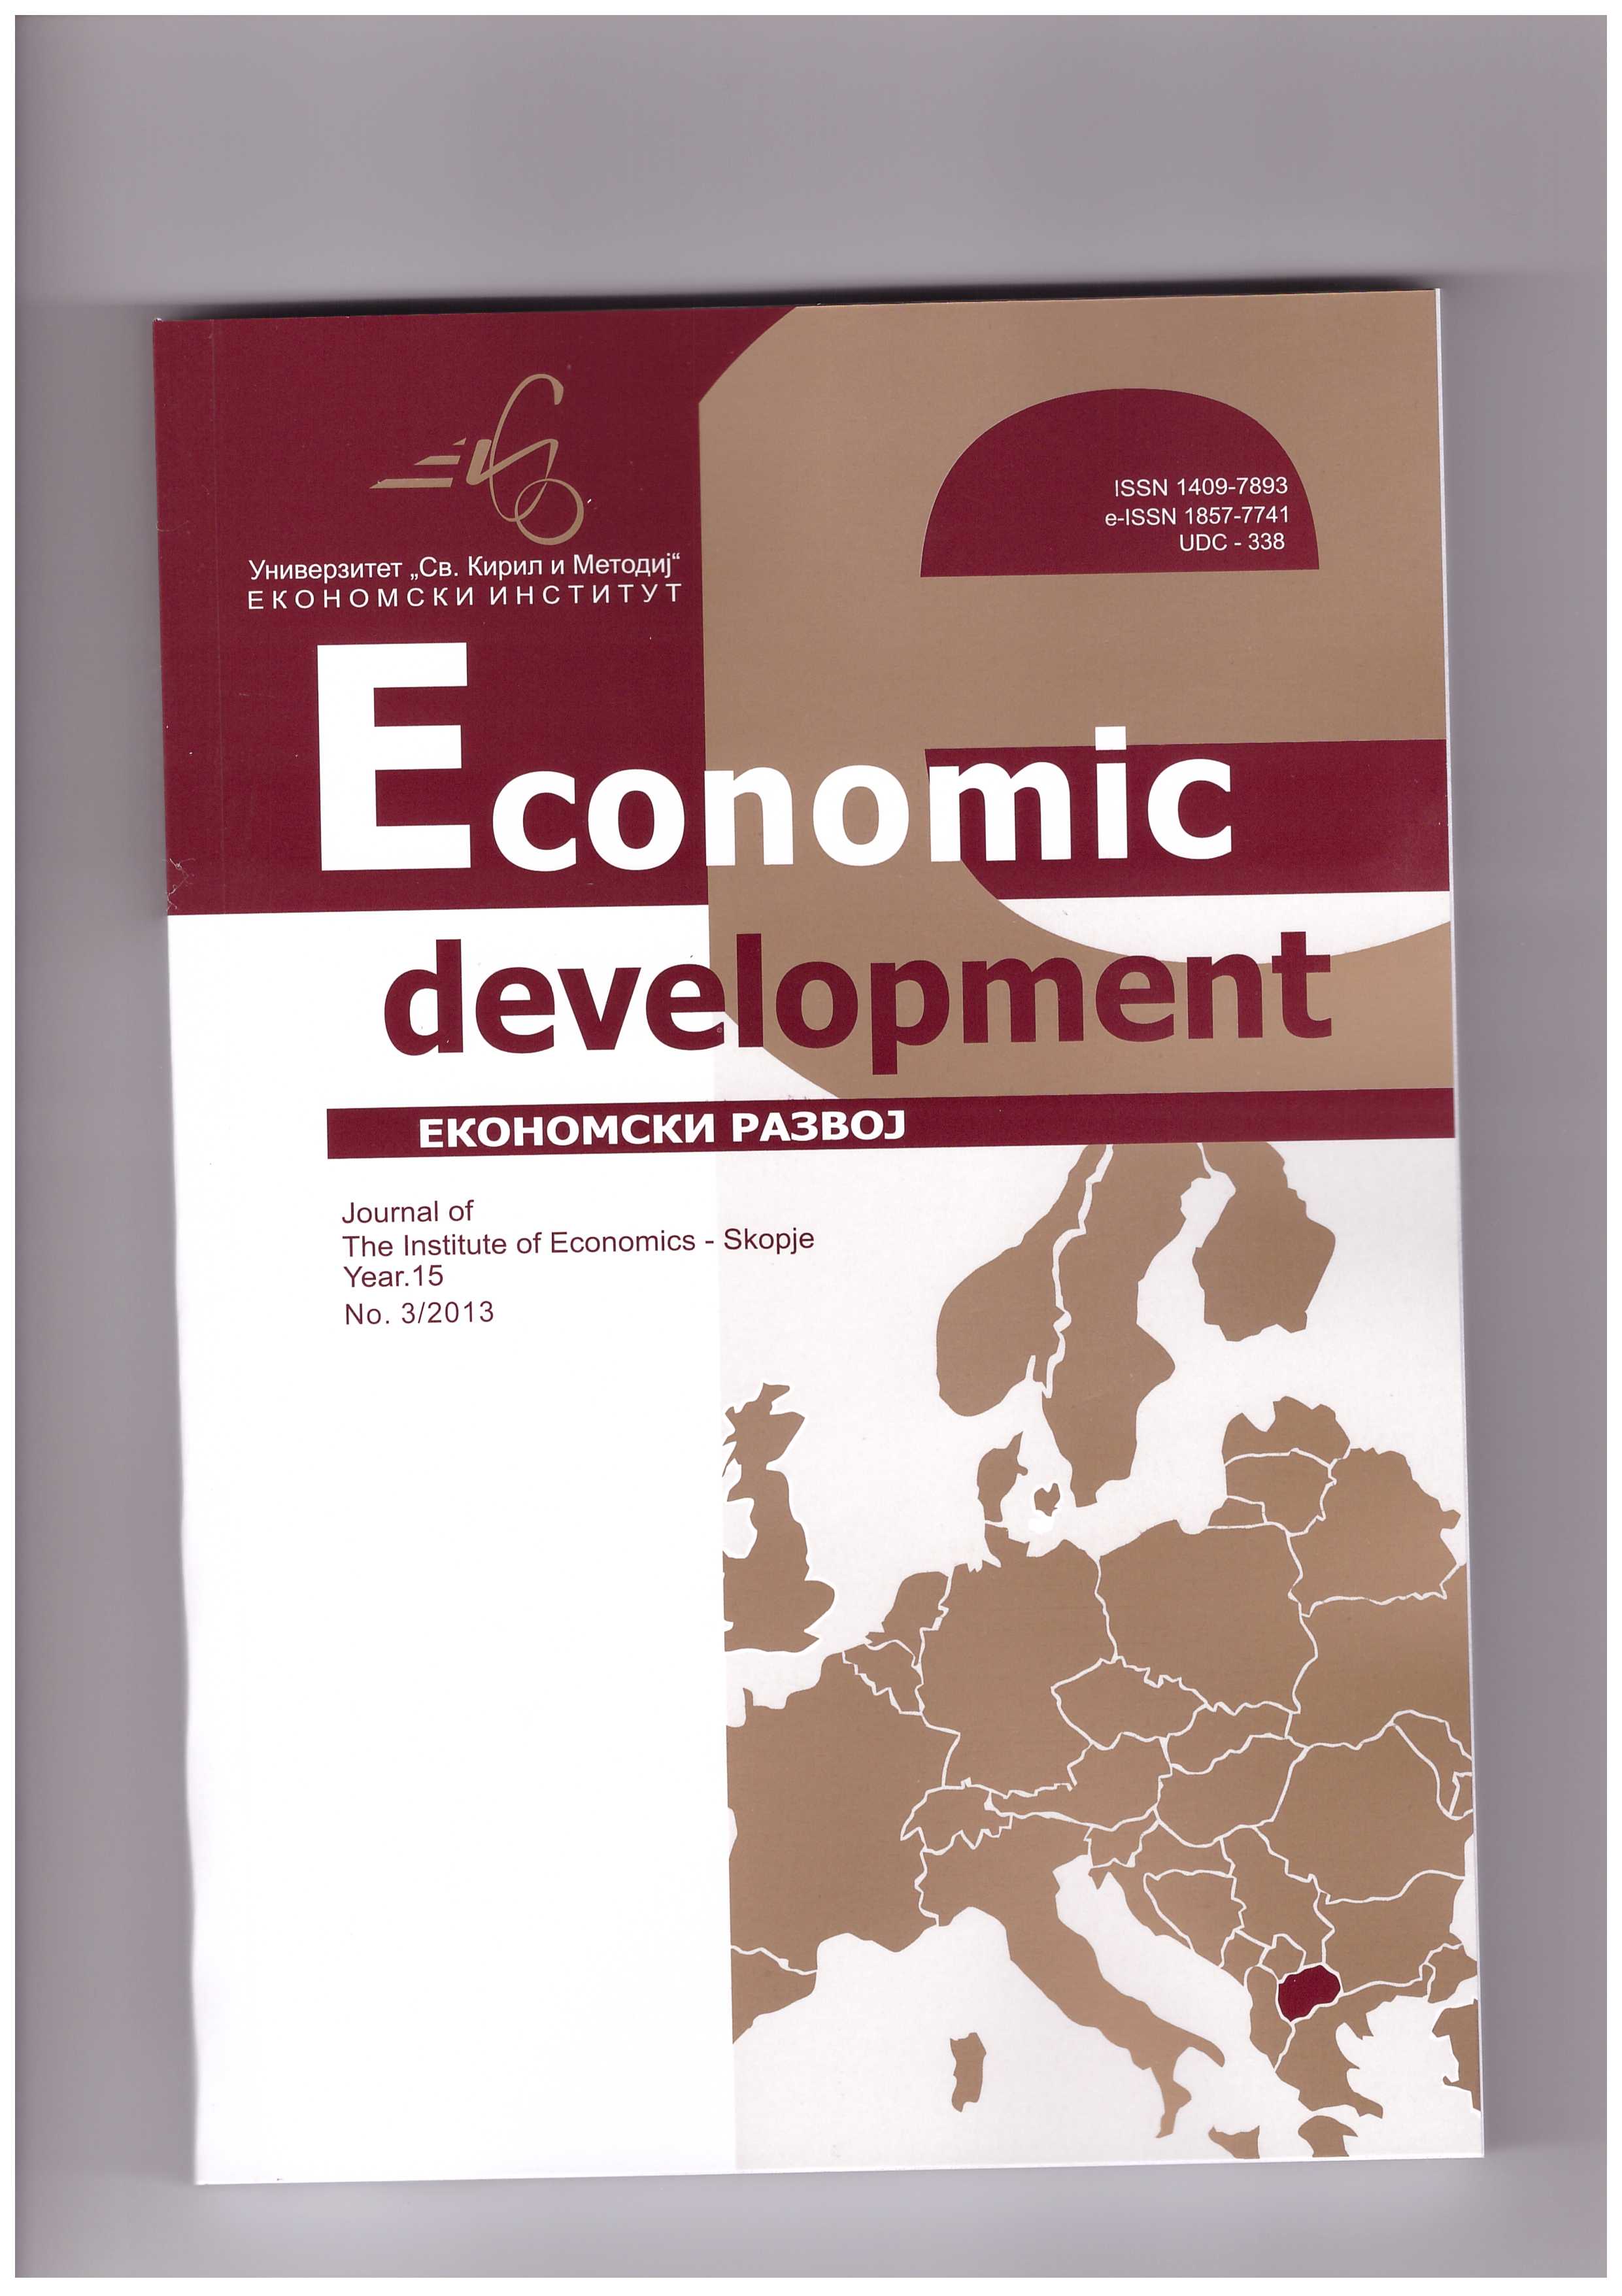 Self employment program via crediting as an incentive for increasing entrepreneurial activity in Republic of Macedonia Cover Image